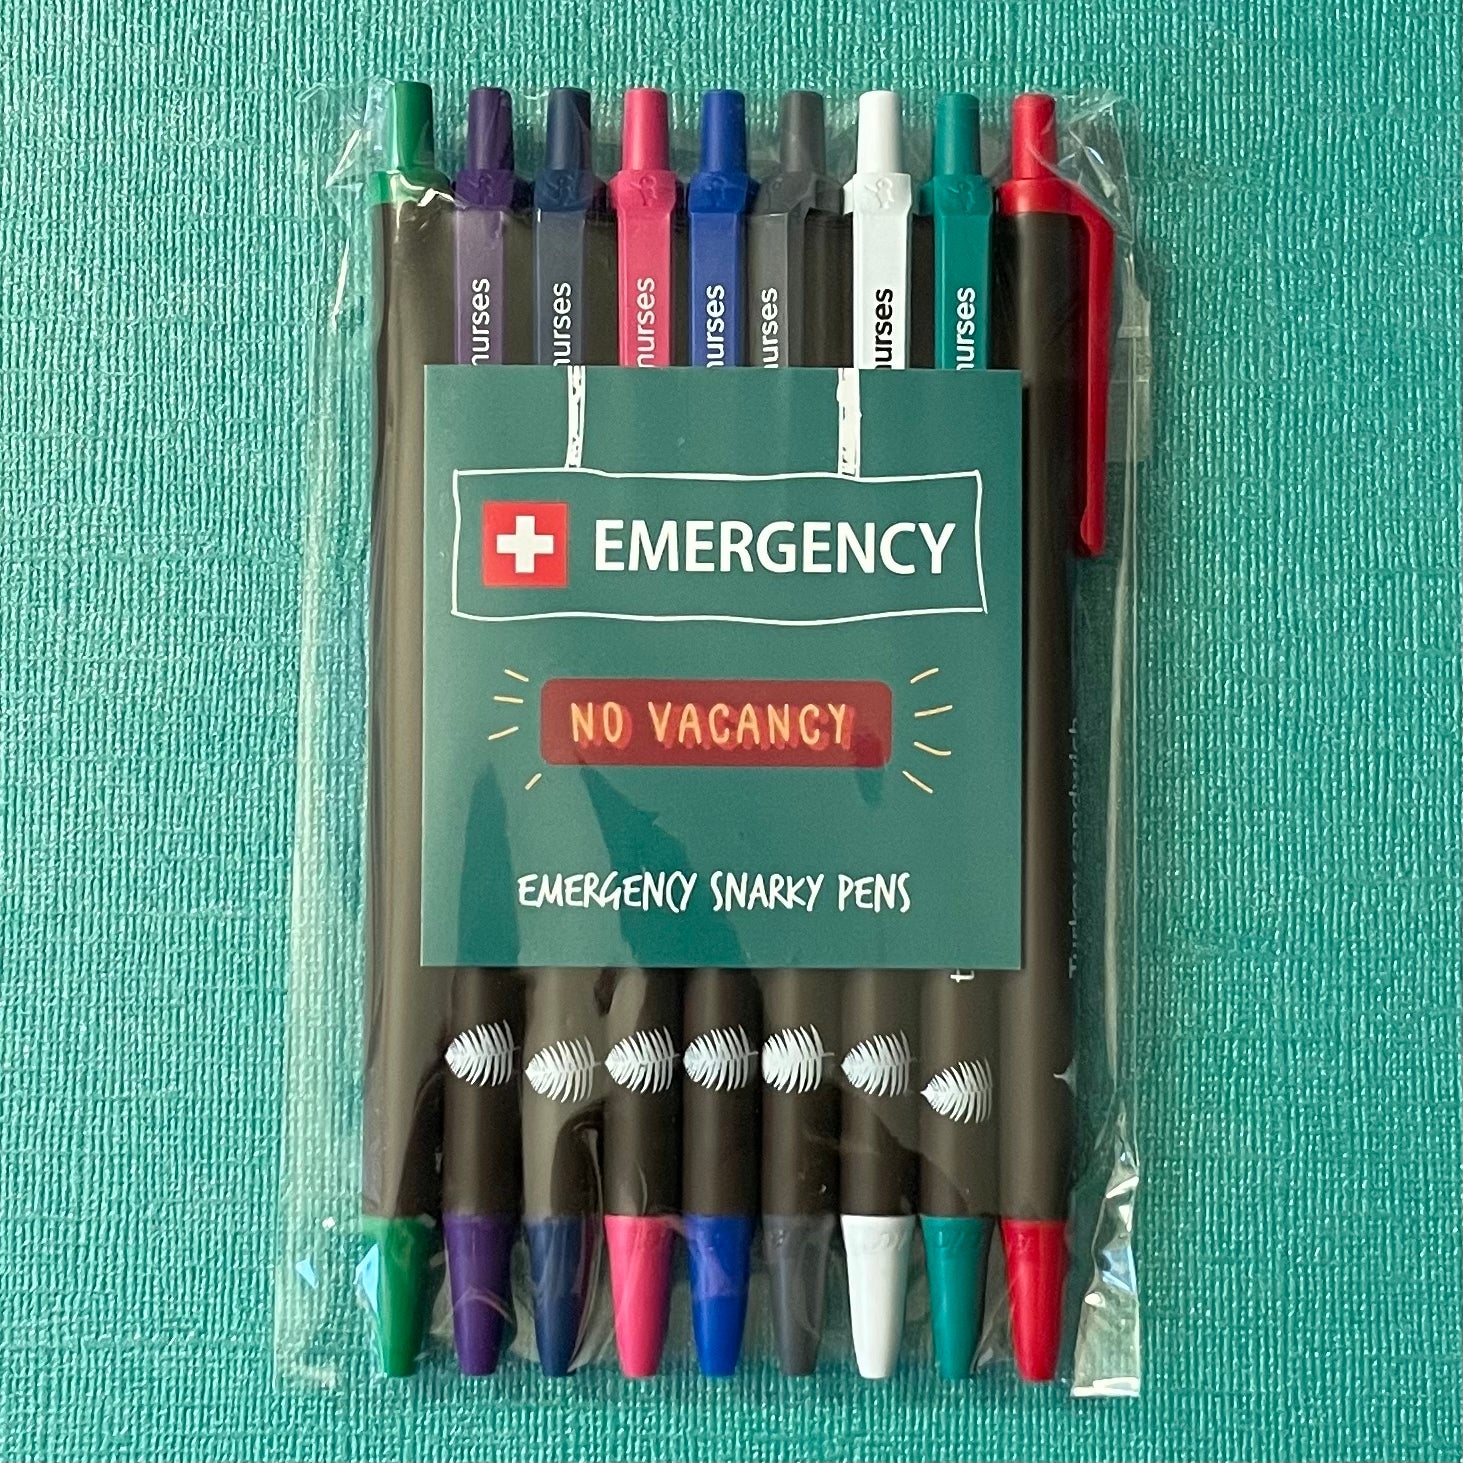 Snarky Pens: Reproductive Rights (Set of 9 Pens)